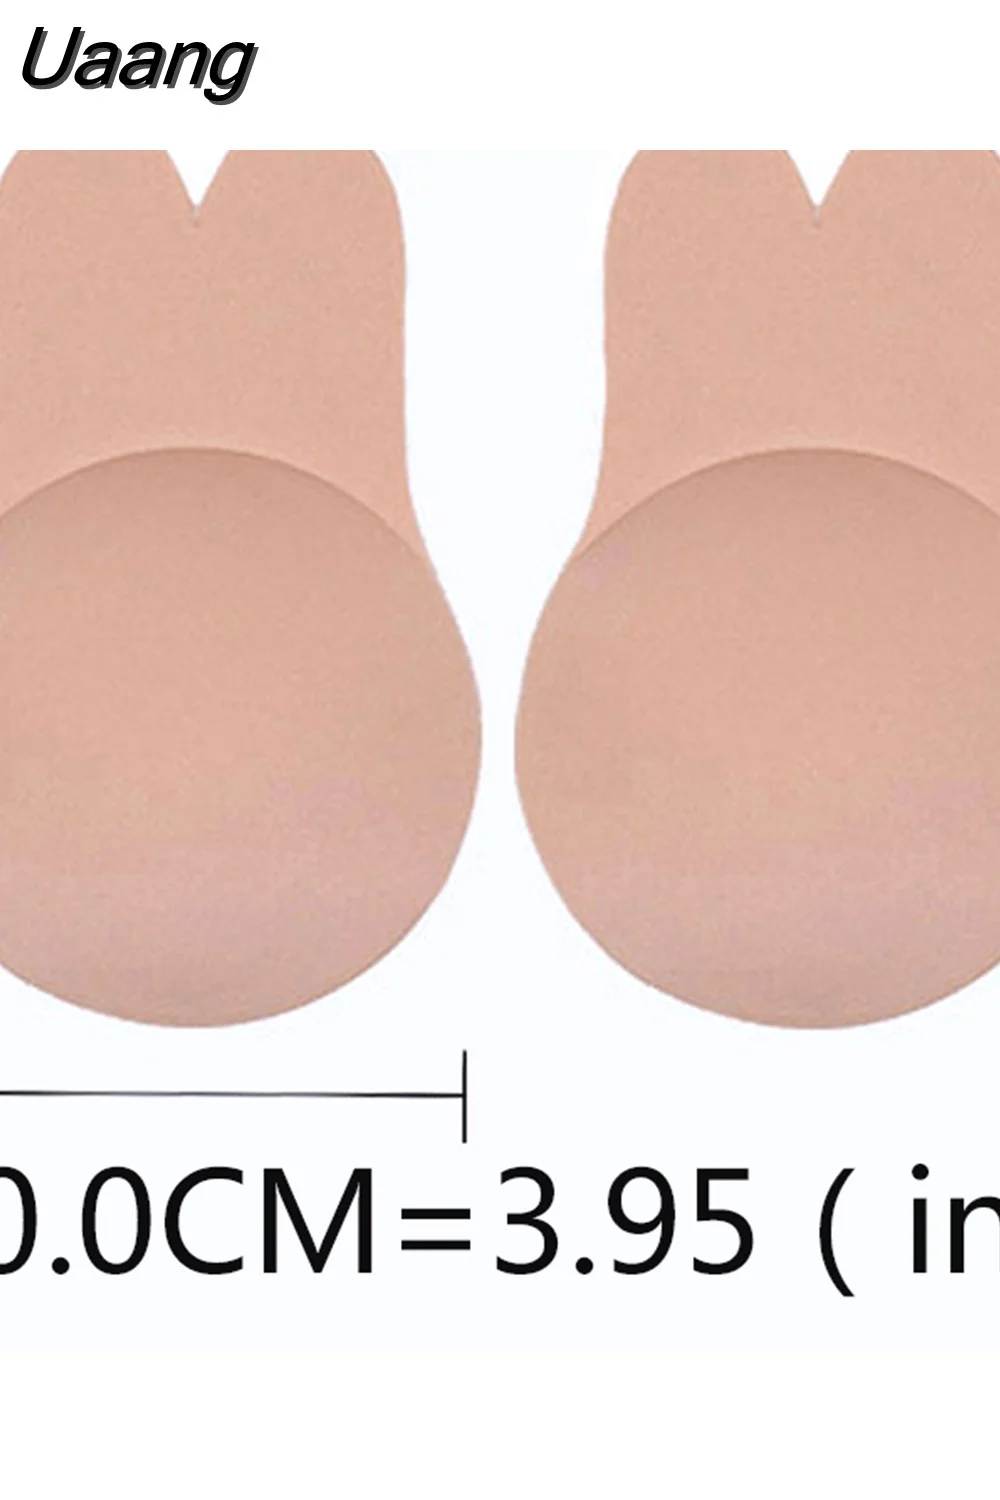 Uaang Adhesive Silicone Bra Pads Reusable Women Fish Tail Bh Sticky Bra Strapless Push Up Invisible Bra Sexy Lingerie Rabbit Bras